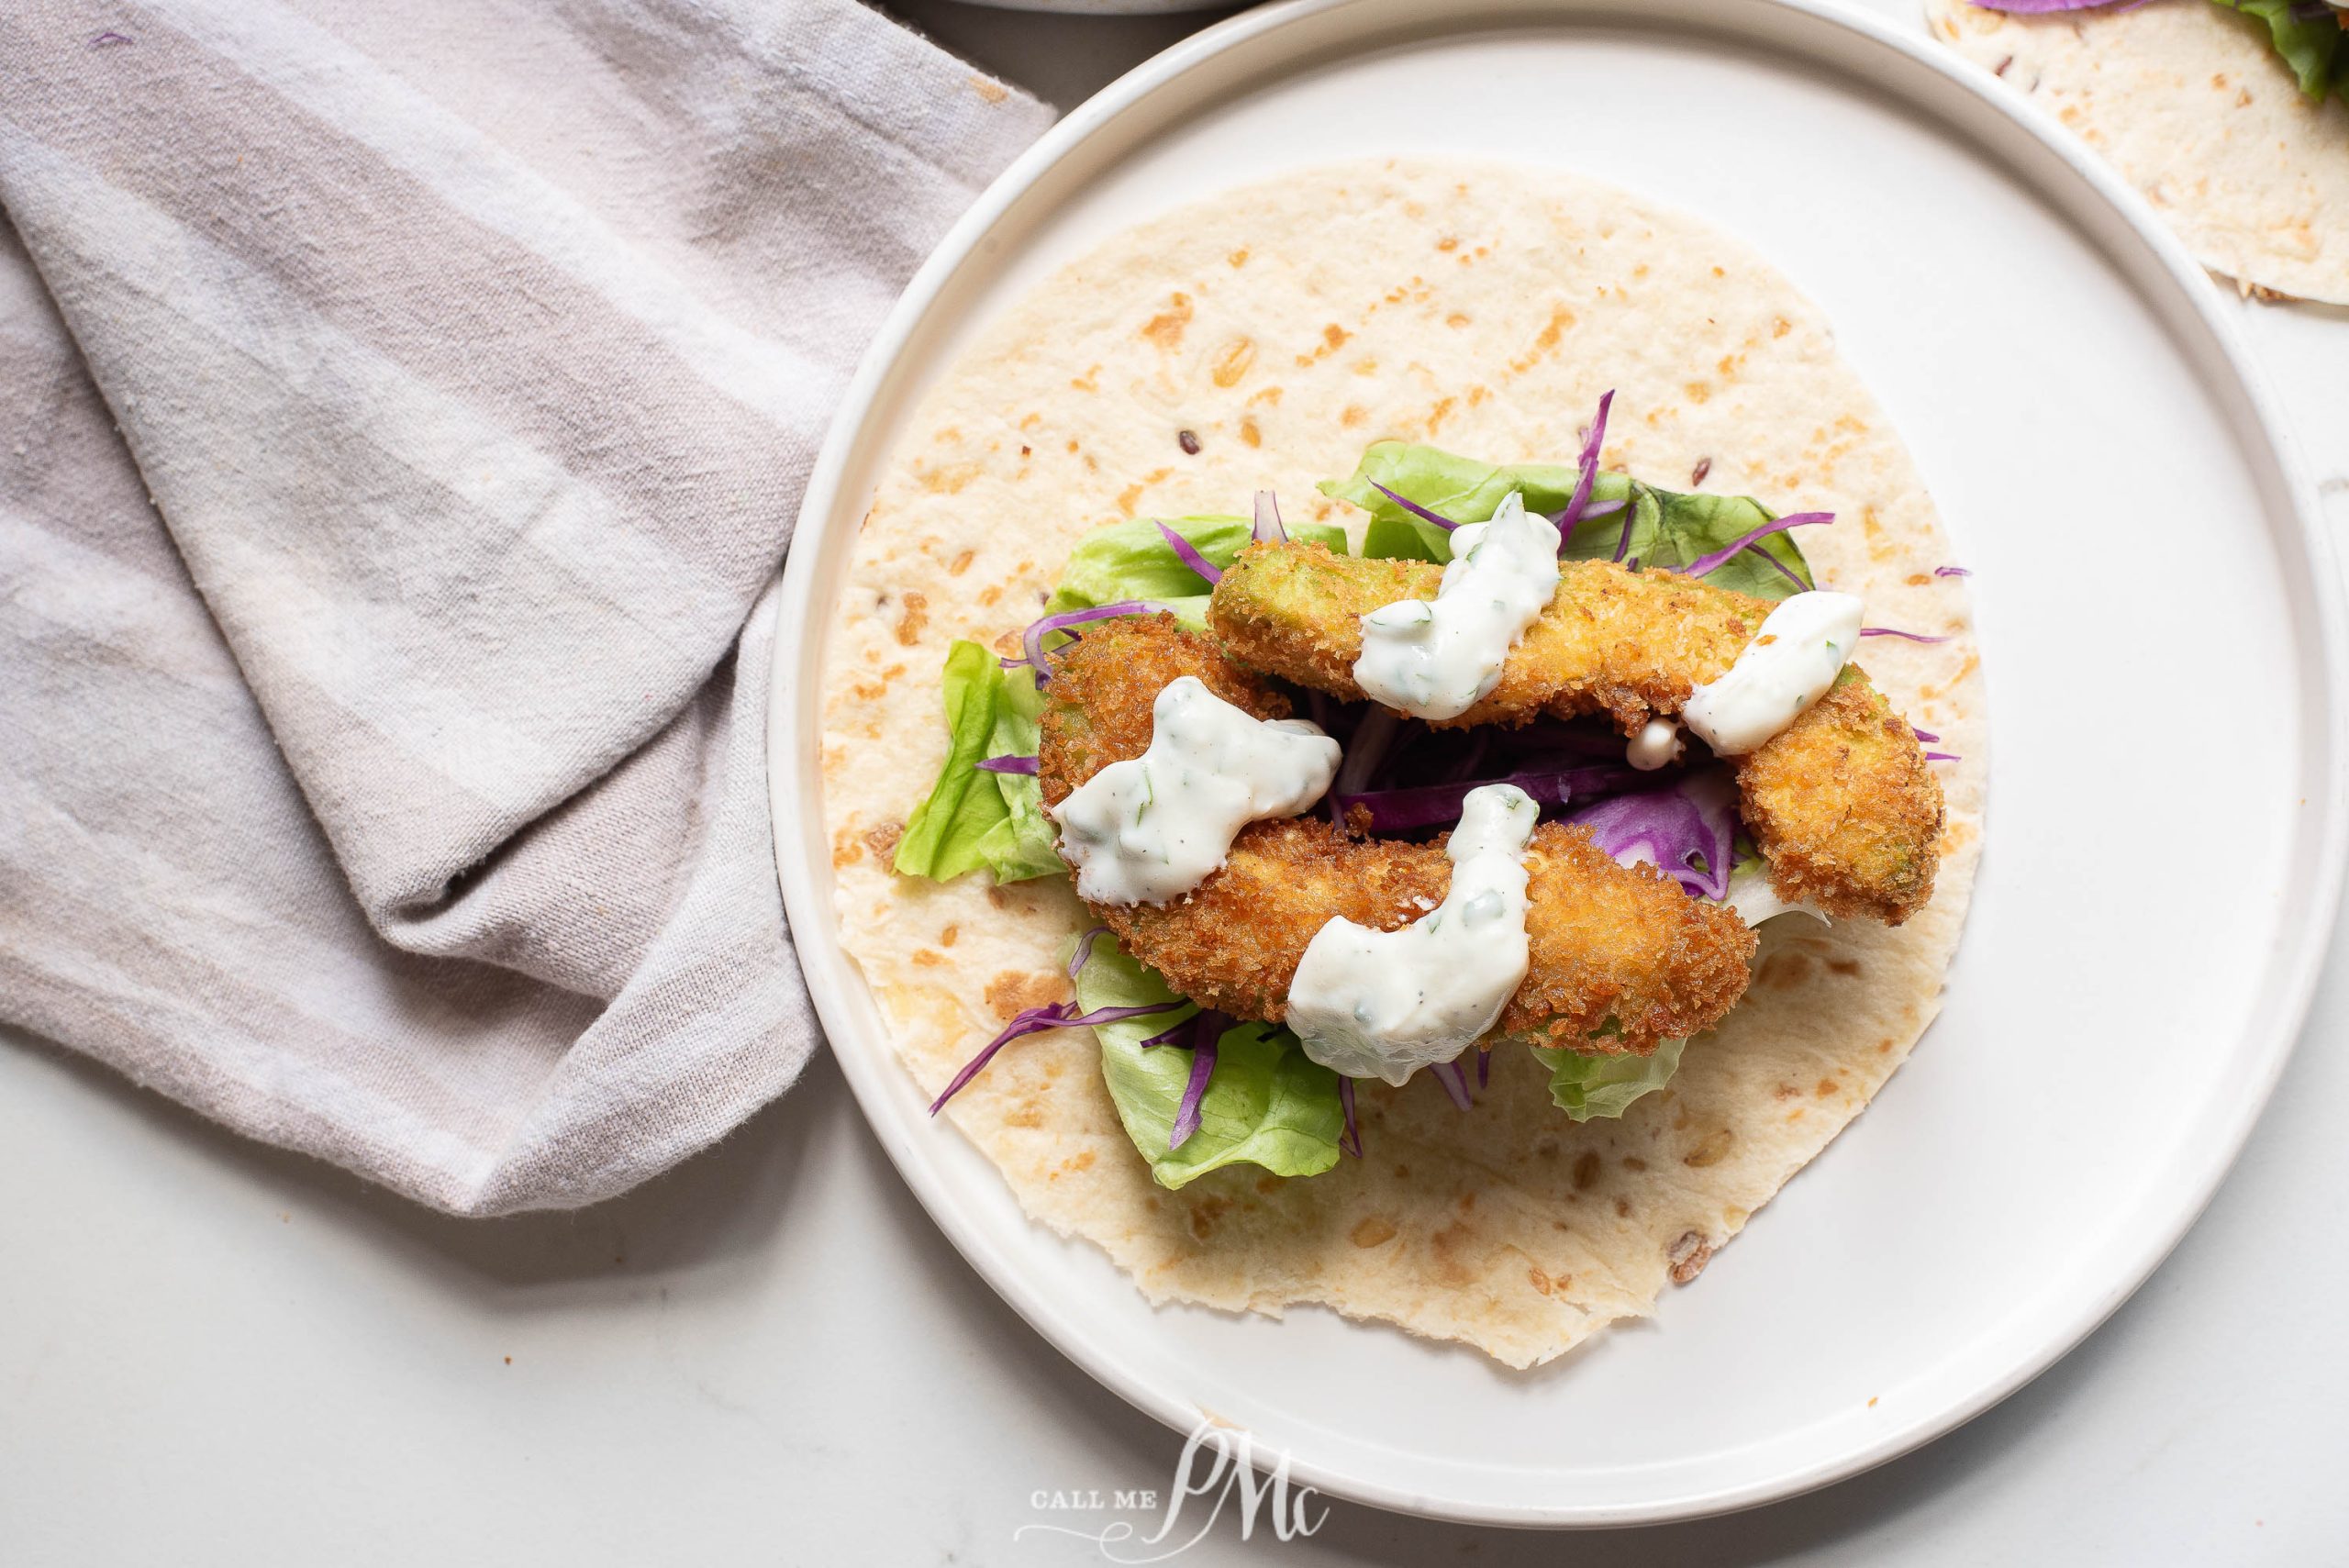 Oven-fried avocado tacos on a plate with salad and dressing.